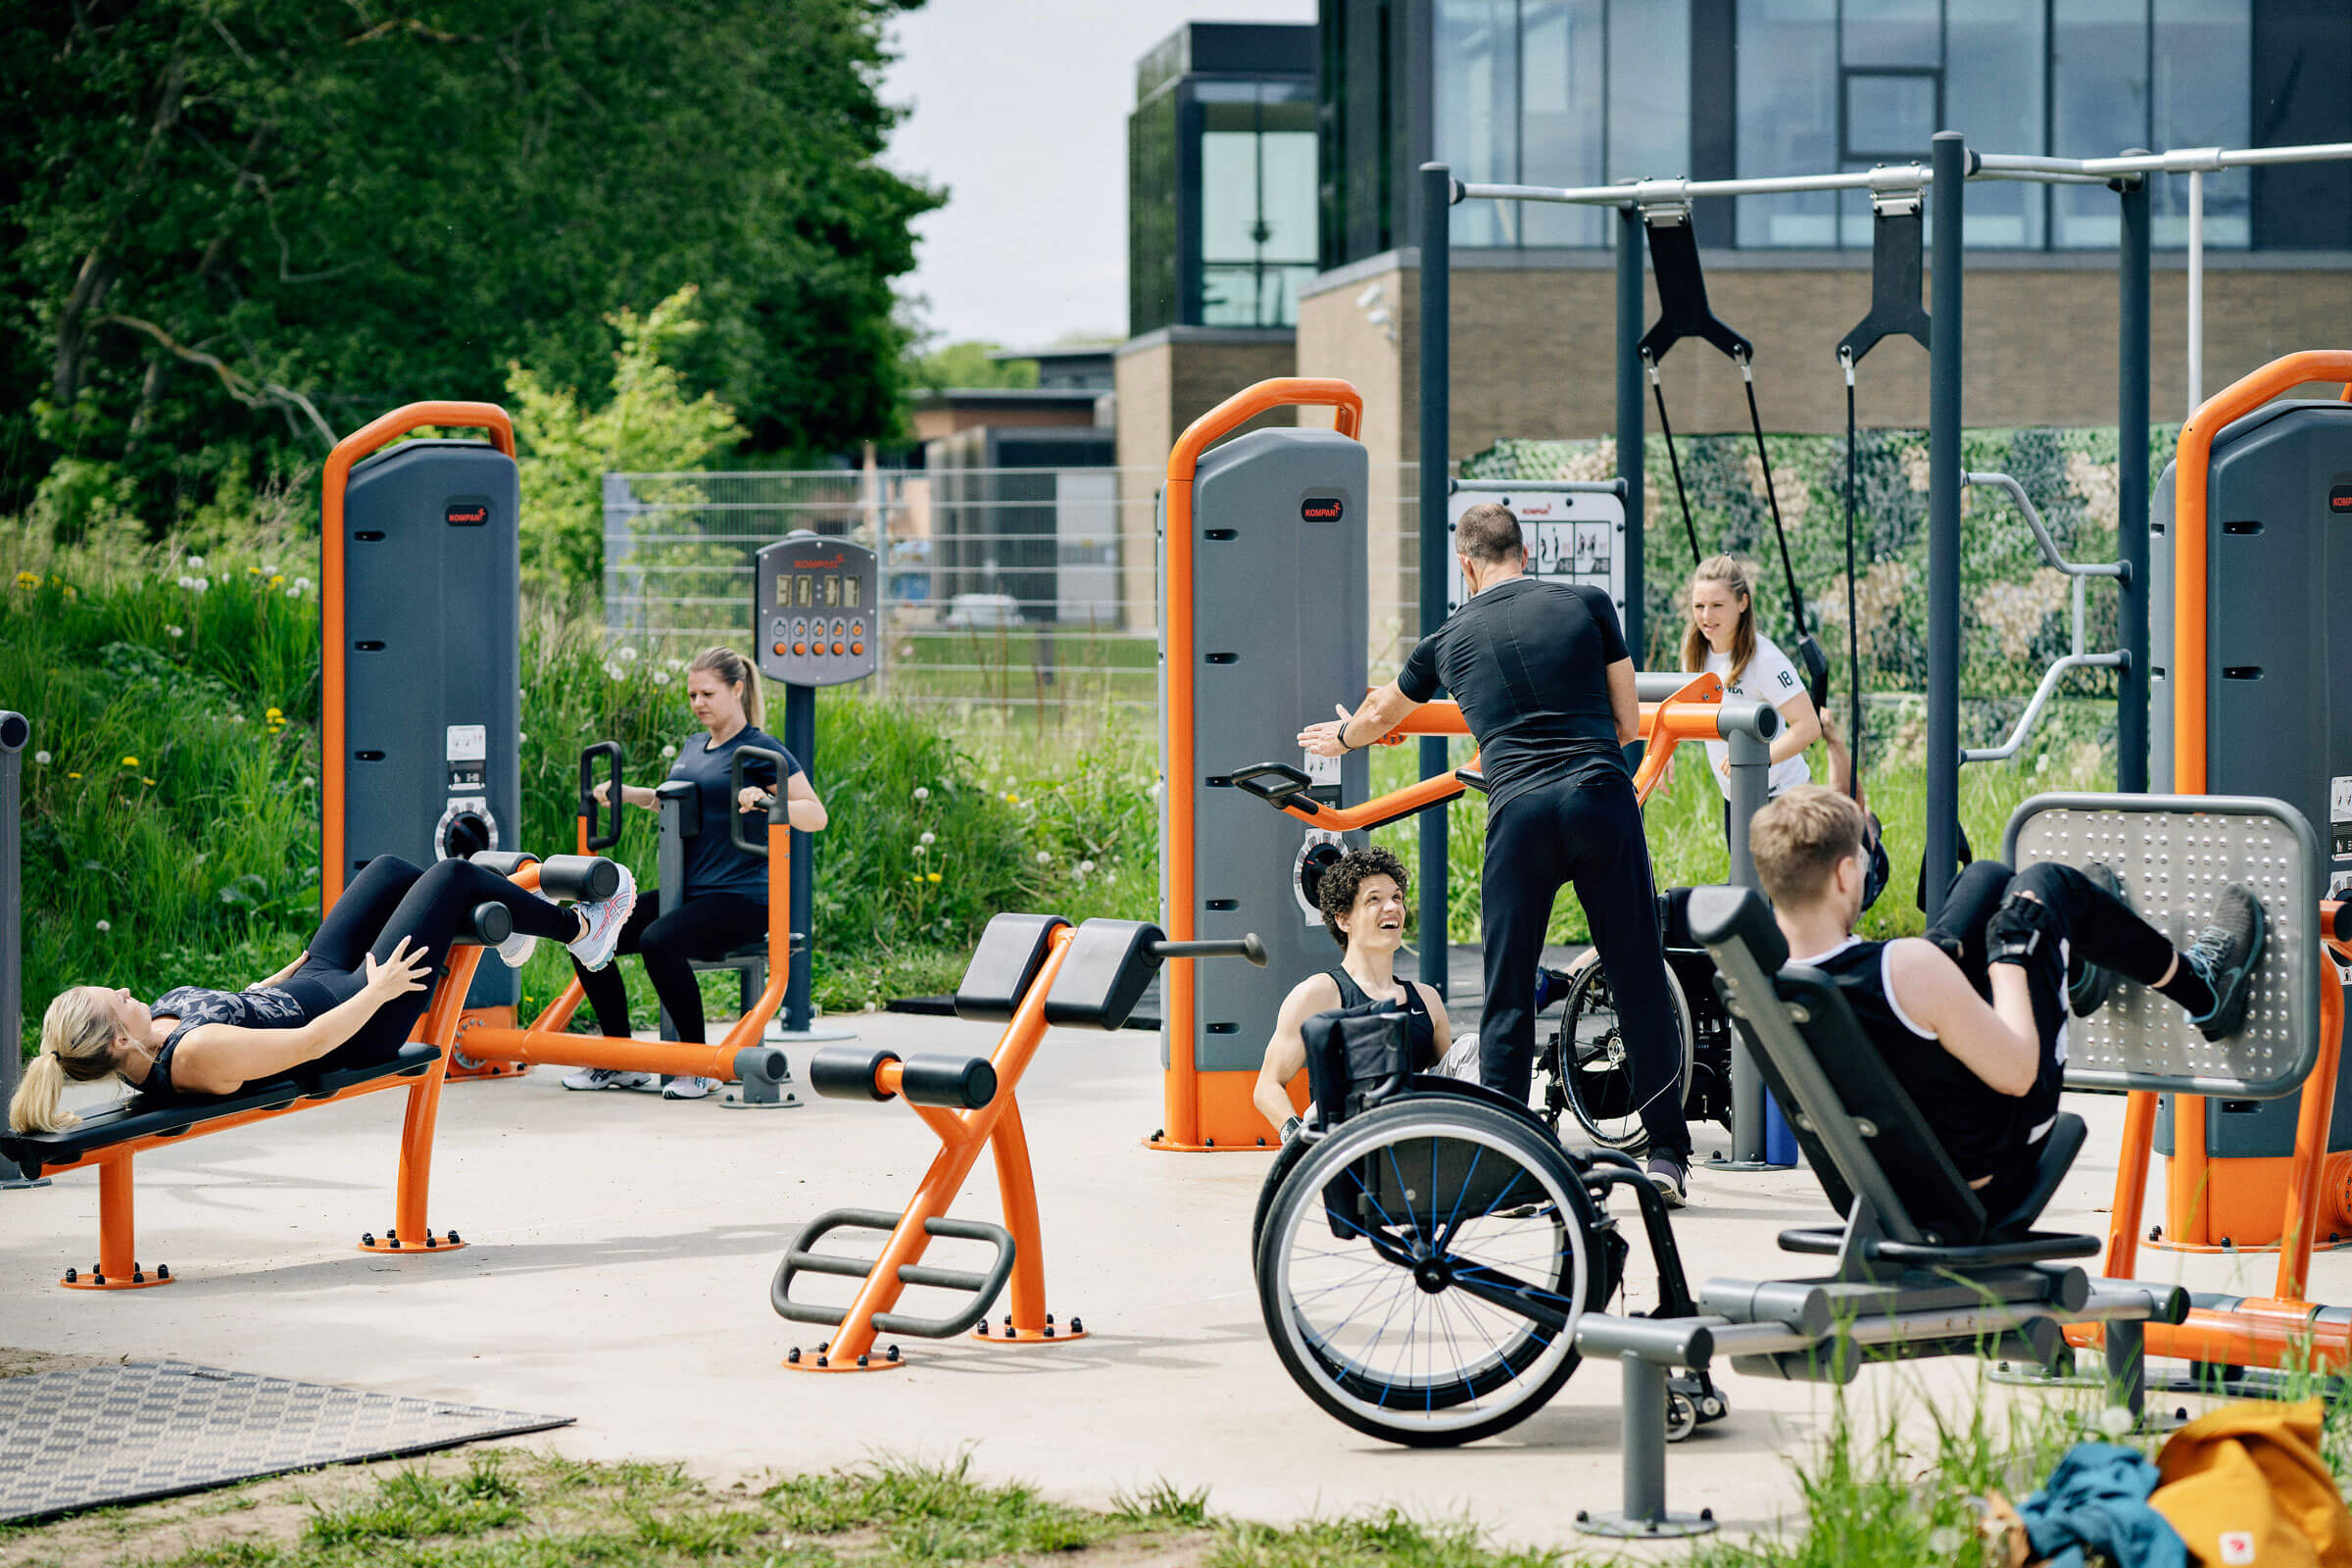 How will you work outdoor fitness into your regime?